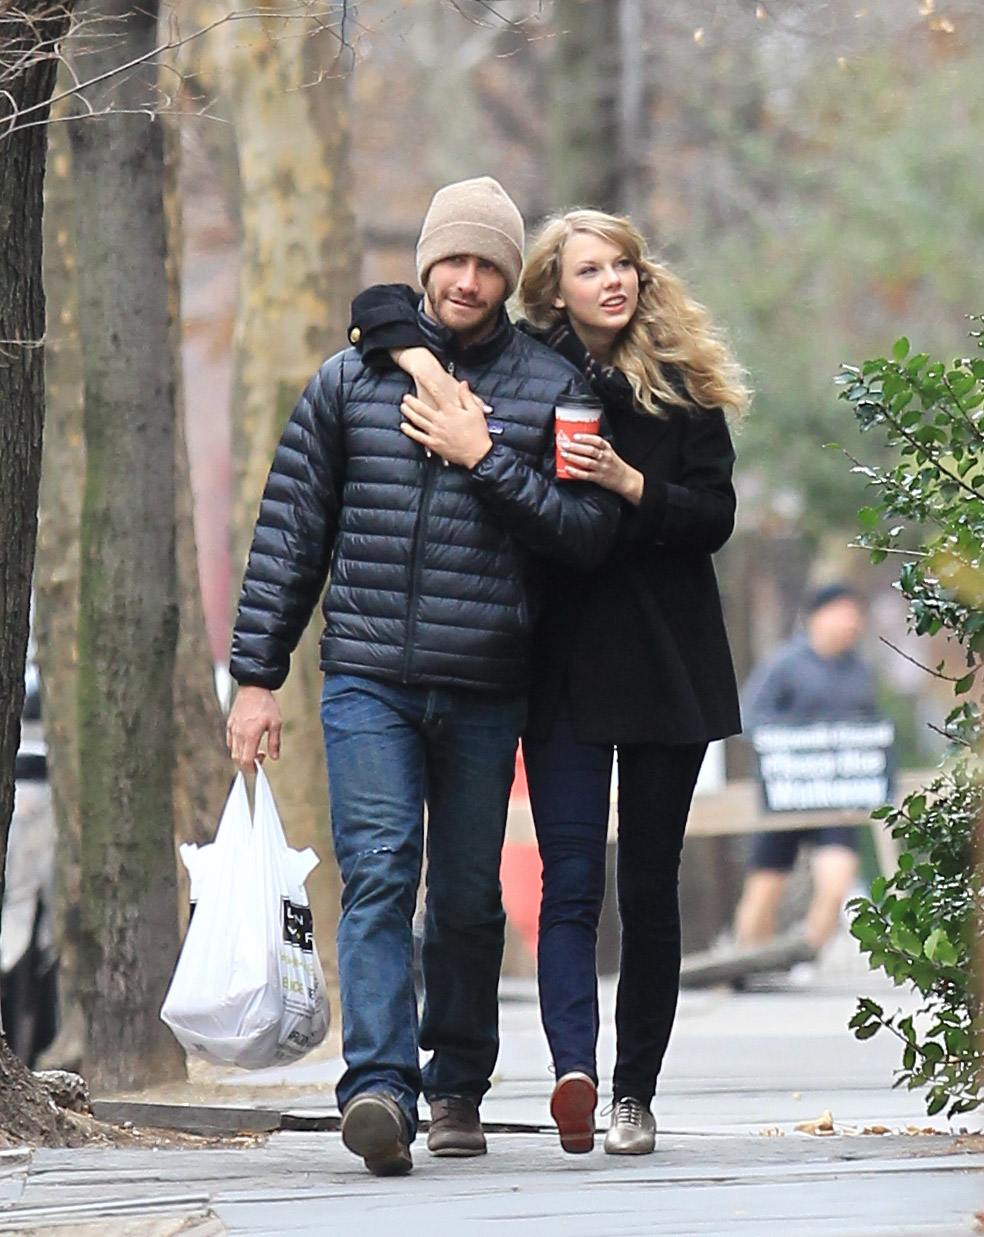 Jake Gyllenhaal and Taylor Swift pictured on a stroll in Brooklyn, New York